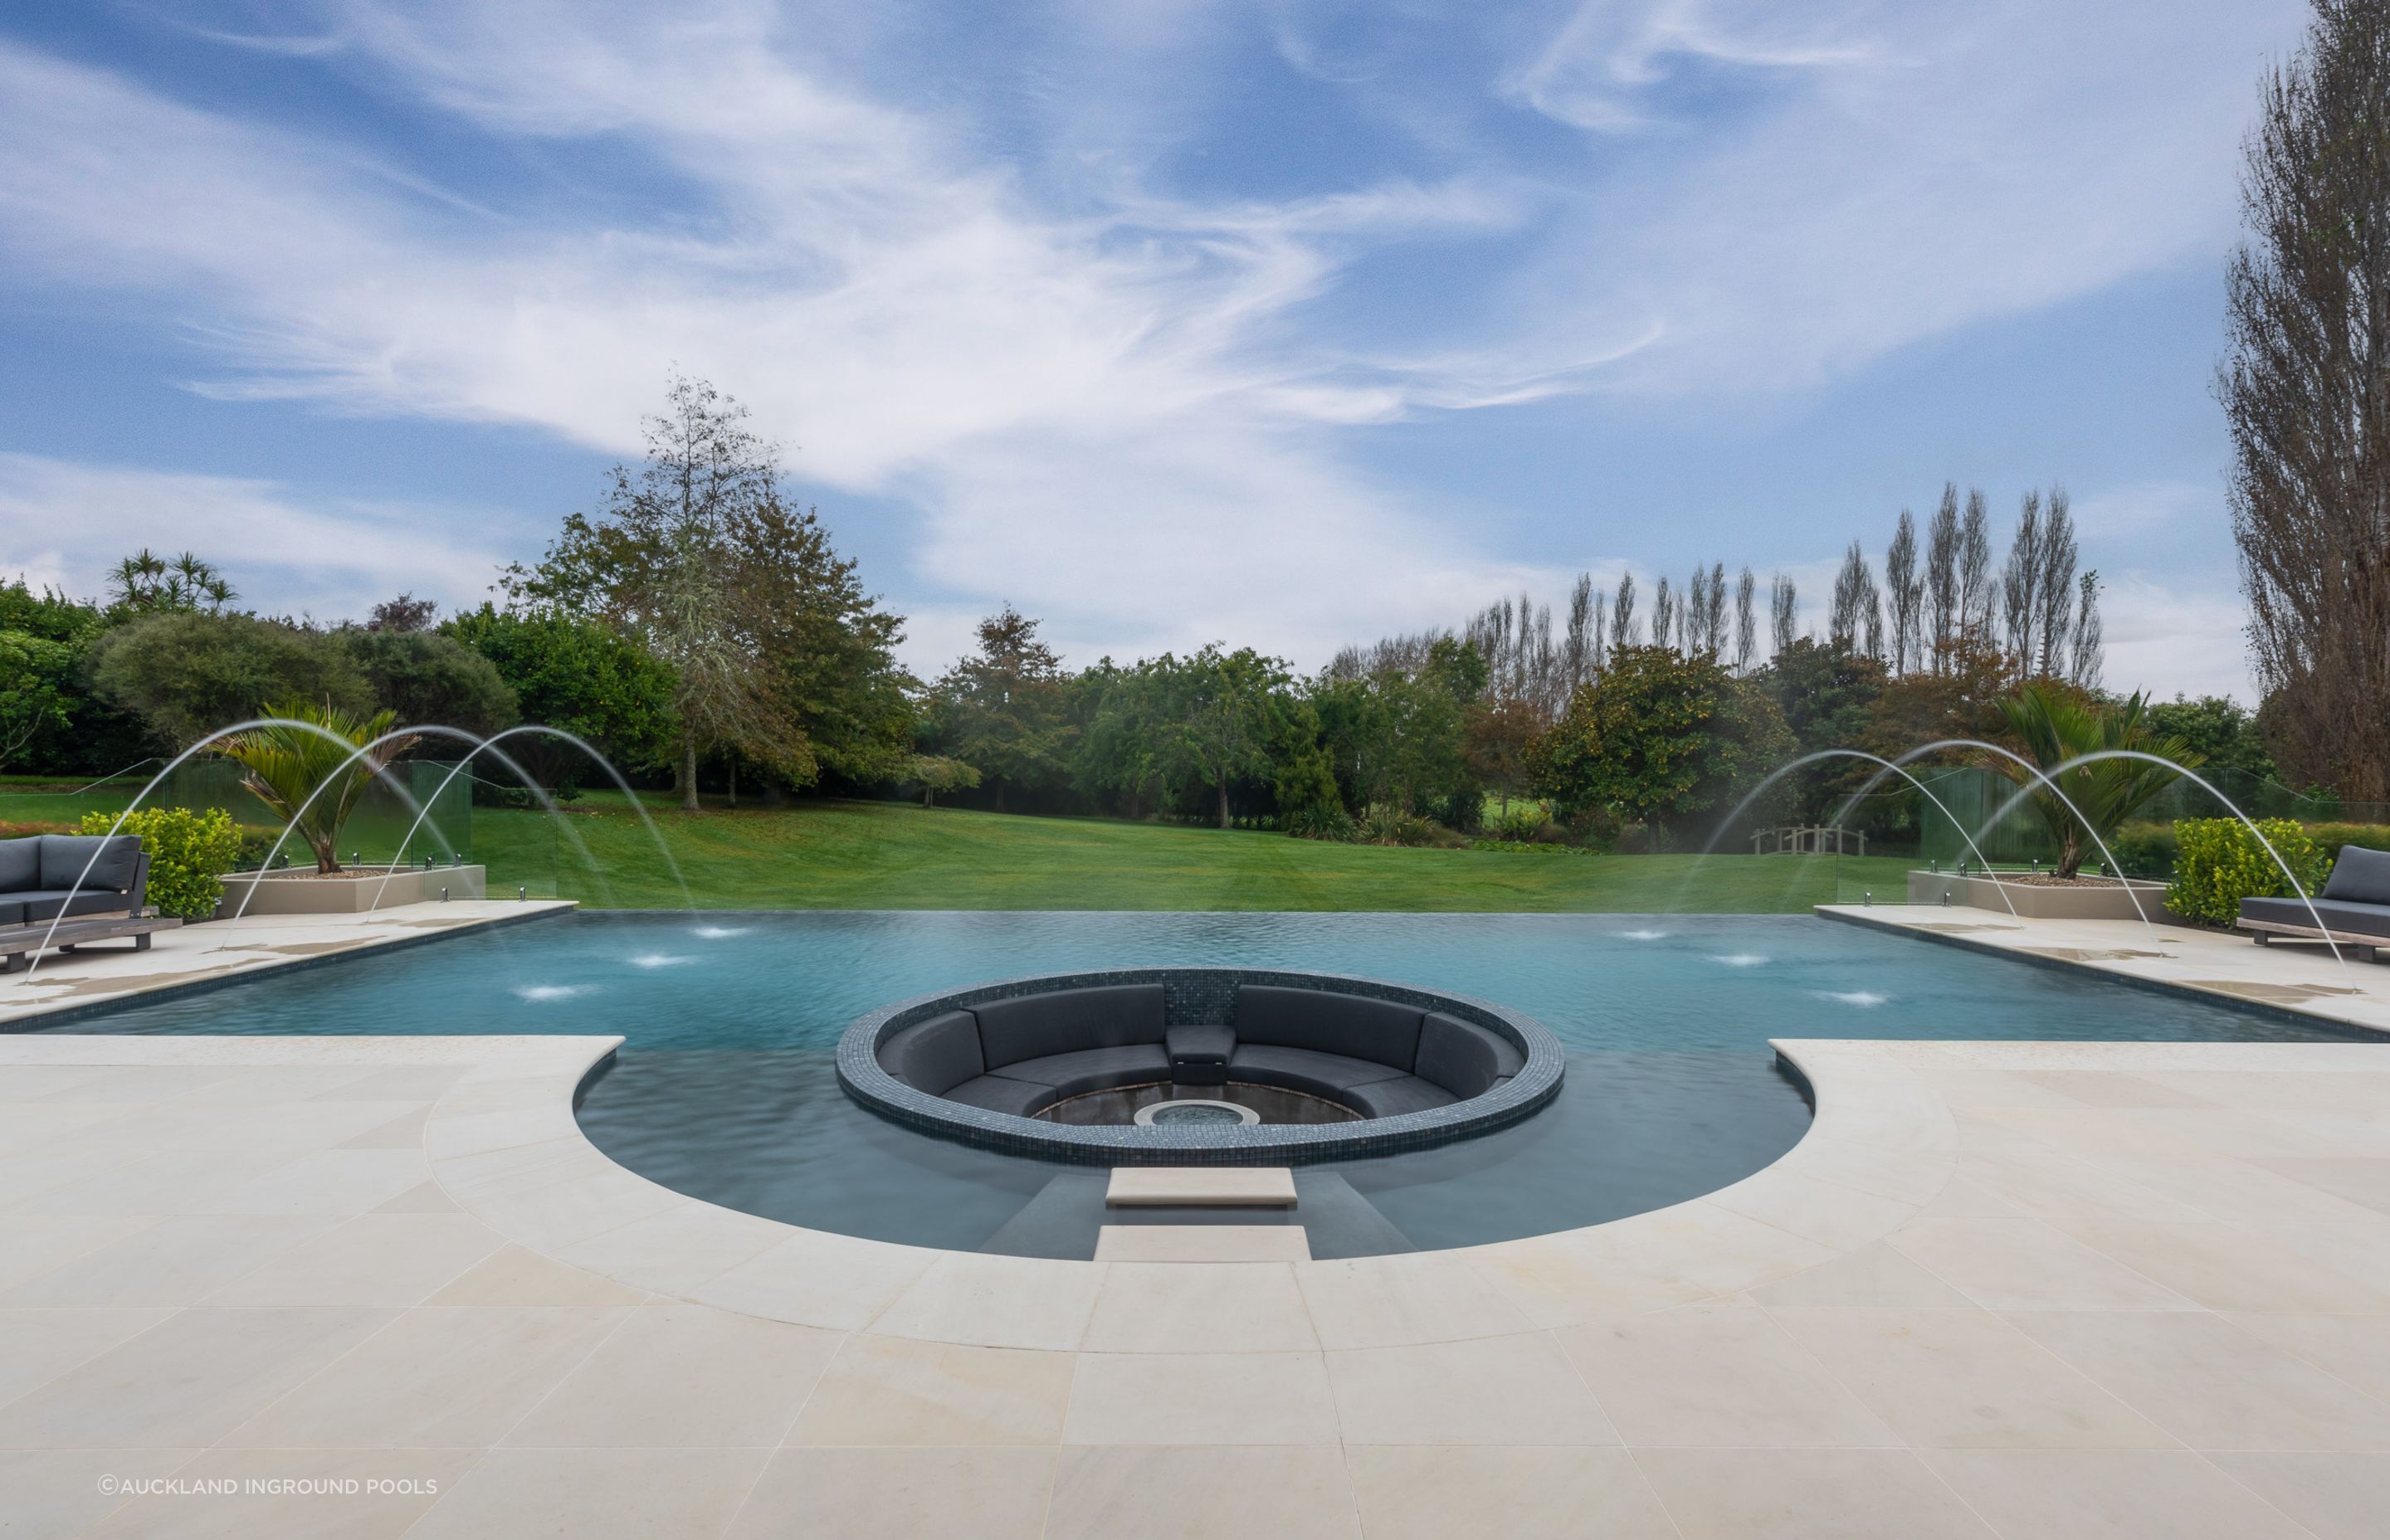 Concrete pools are popular for their endless customisation options.